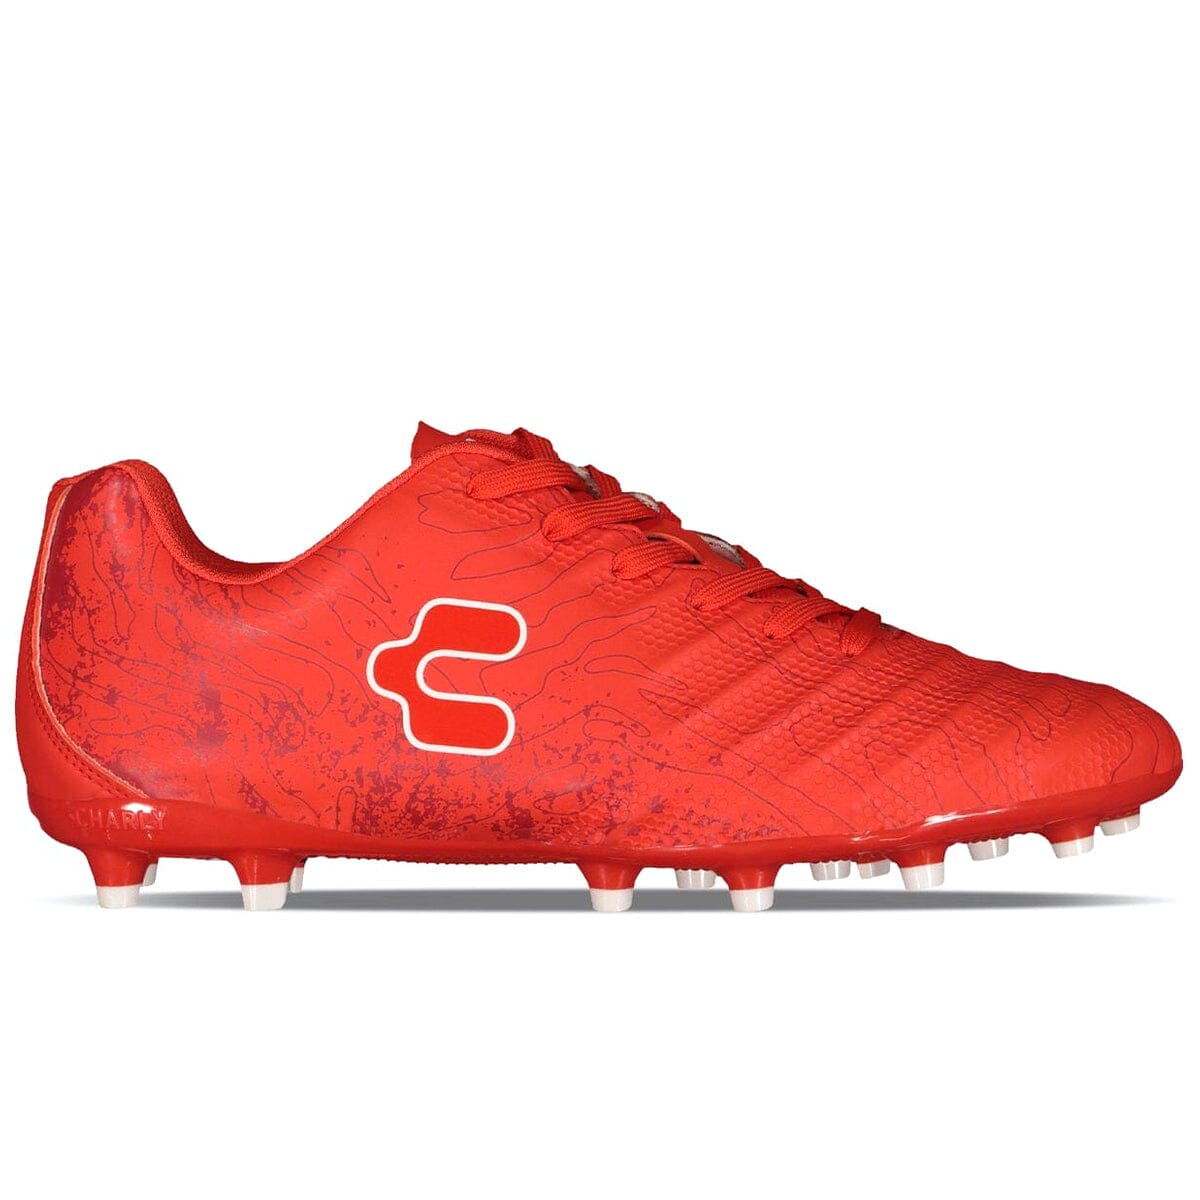 Charly Hotcross 2.0 Firm Ground Soccer Cleats | 1098597002 Cleats Charly 11K Red / Red 